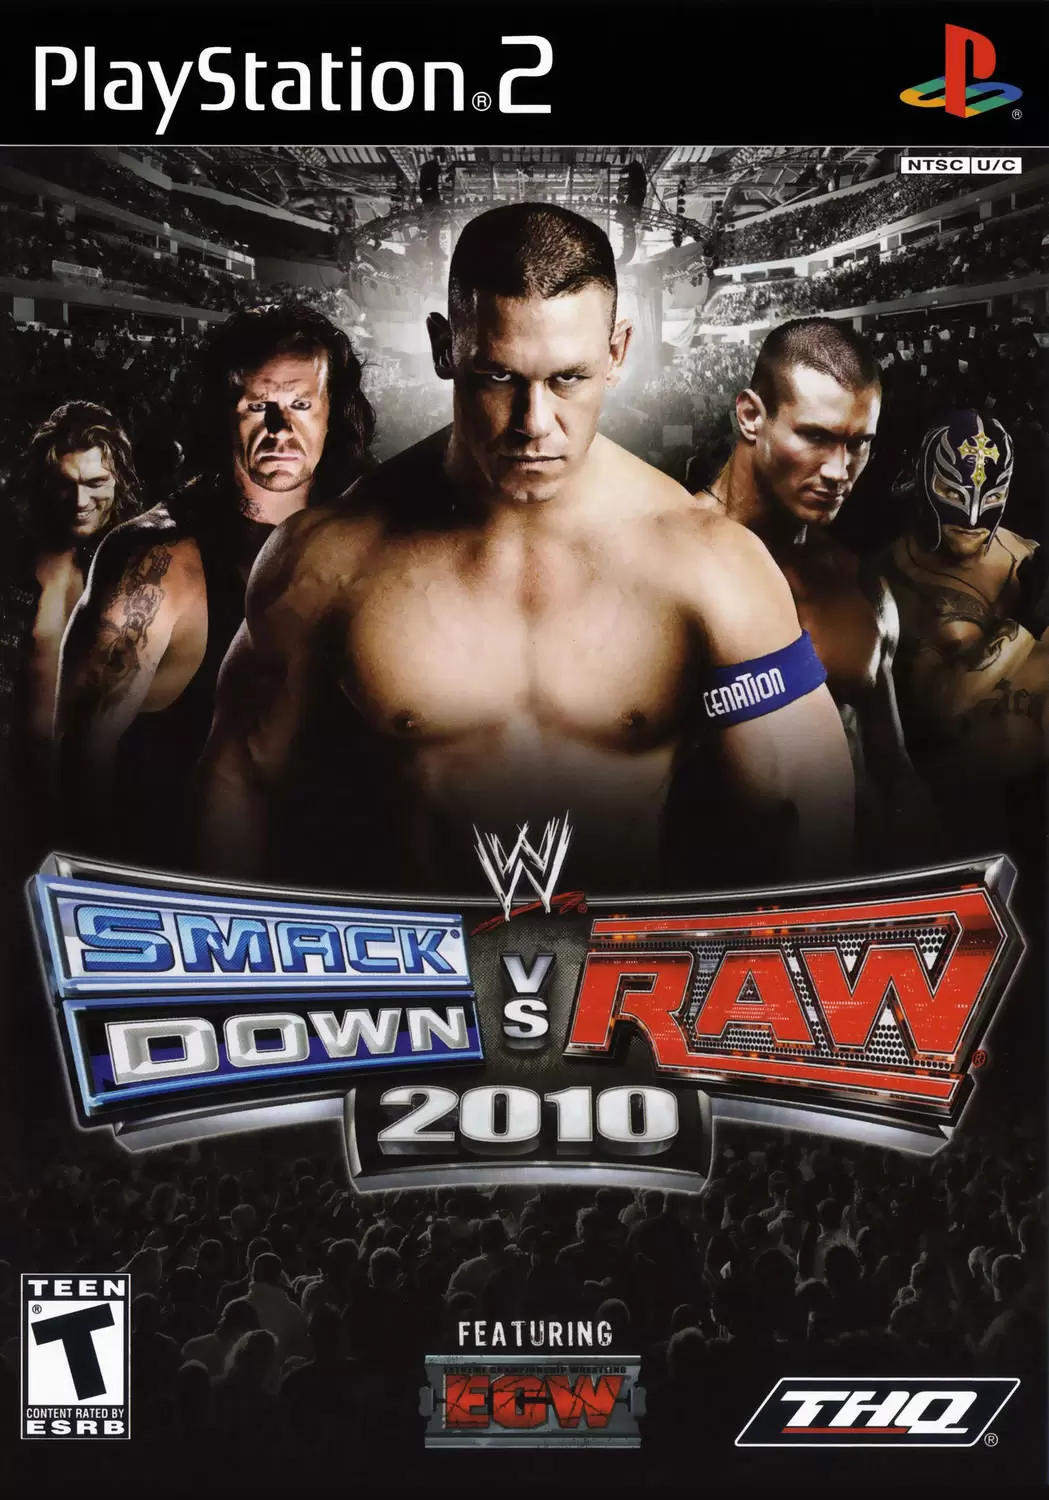 PS2 Games - WWE SmackDown vs. Raw 2010